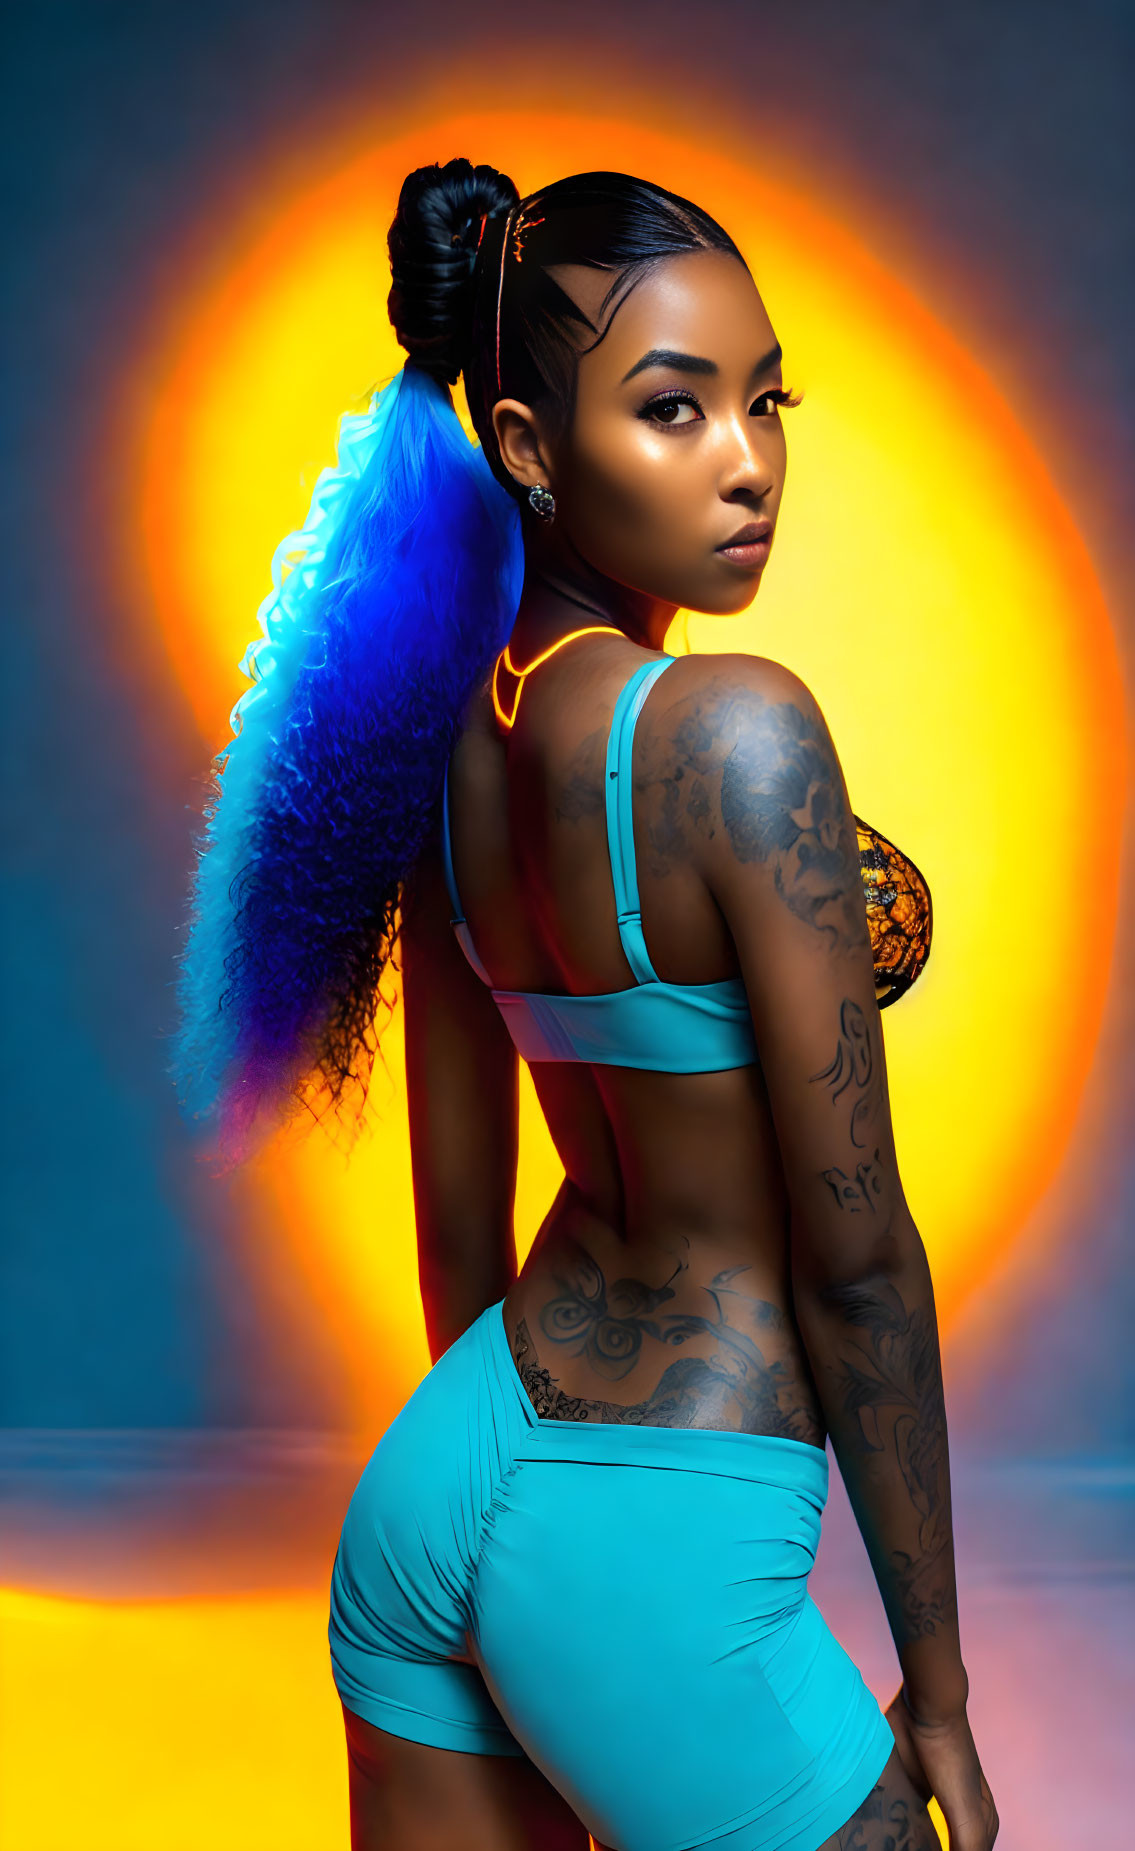 Tattooed woman with blue ombre ponytail in blue outfit on gradient background